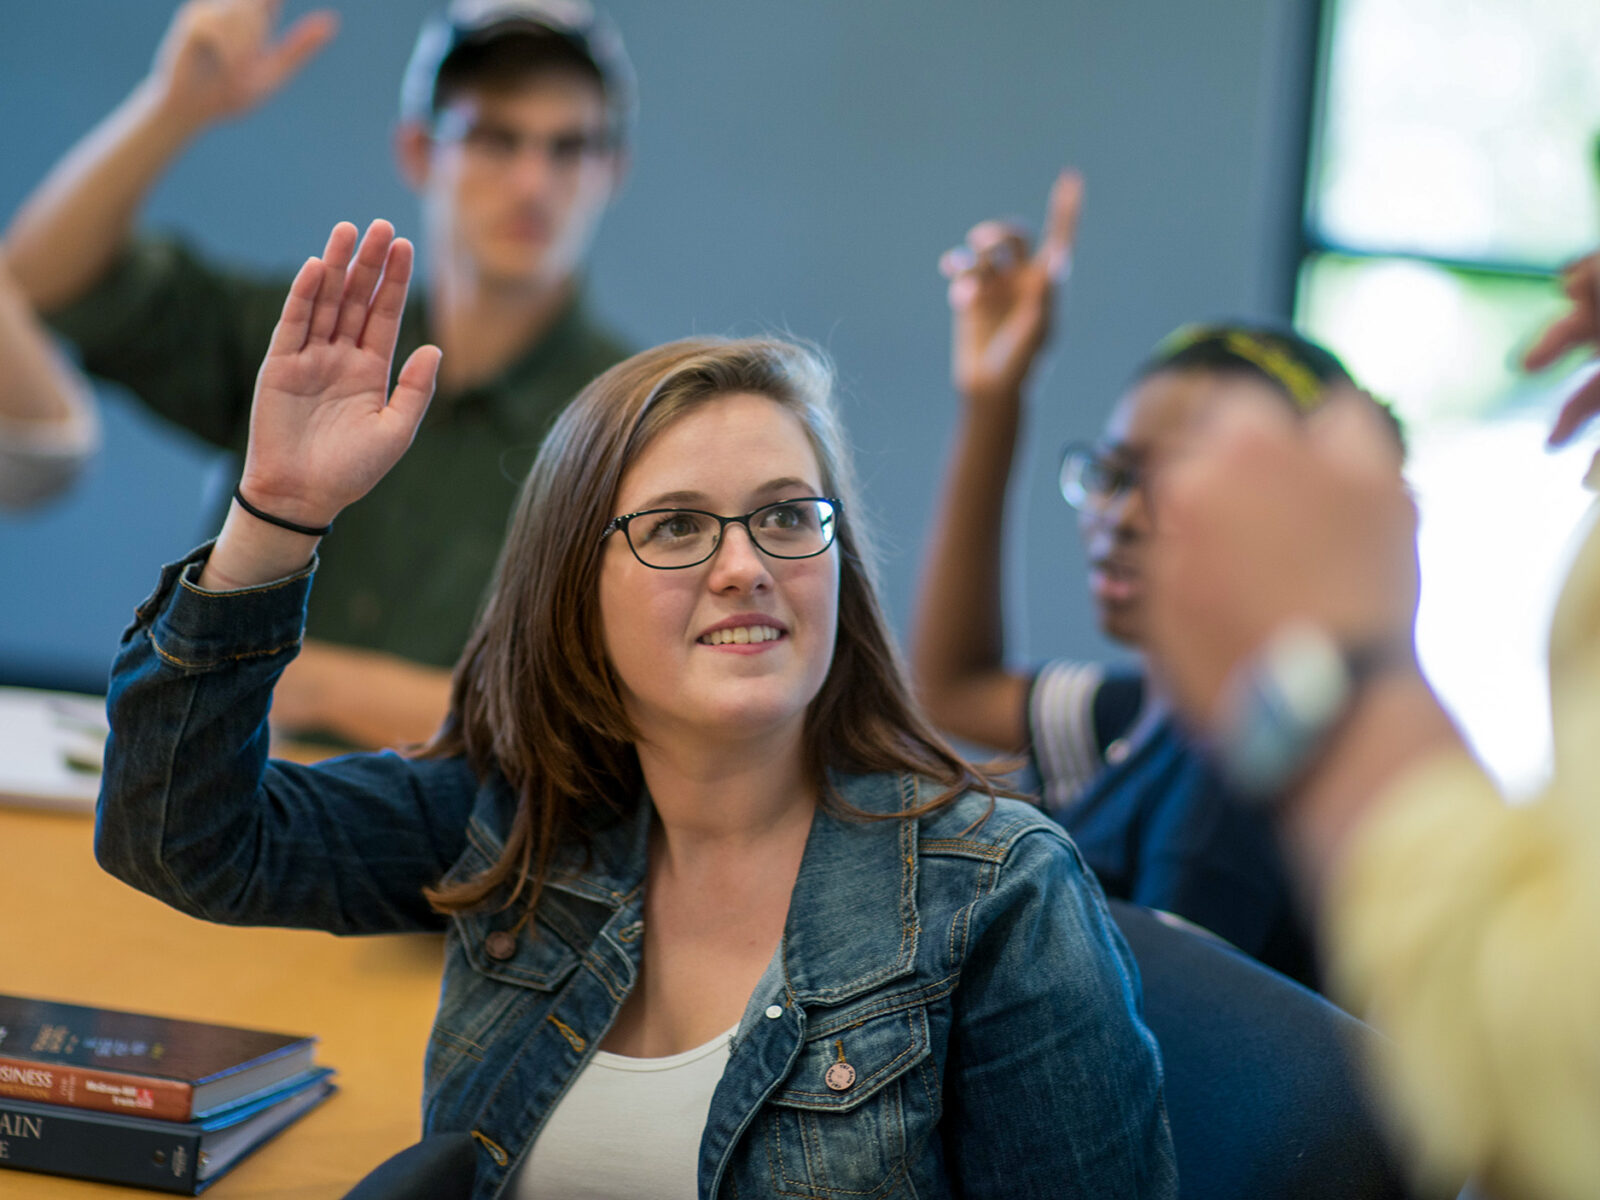 students raise their hands in class